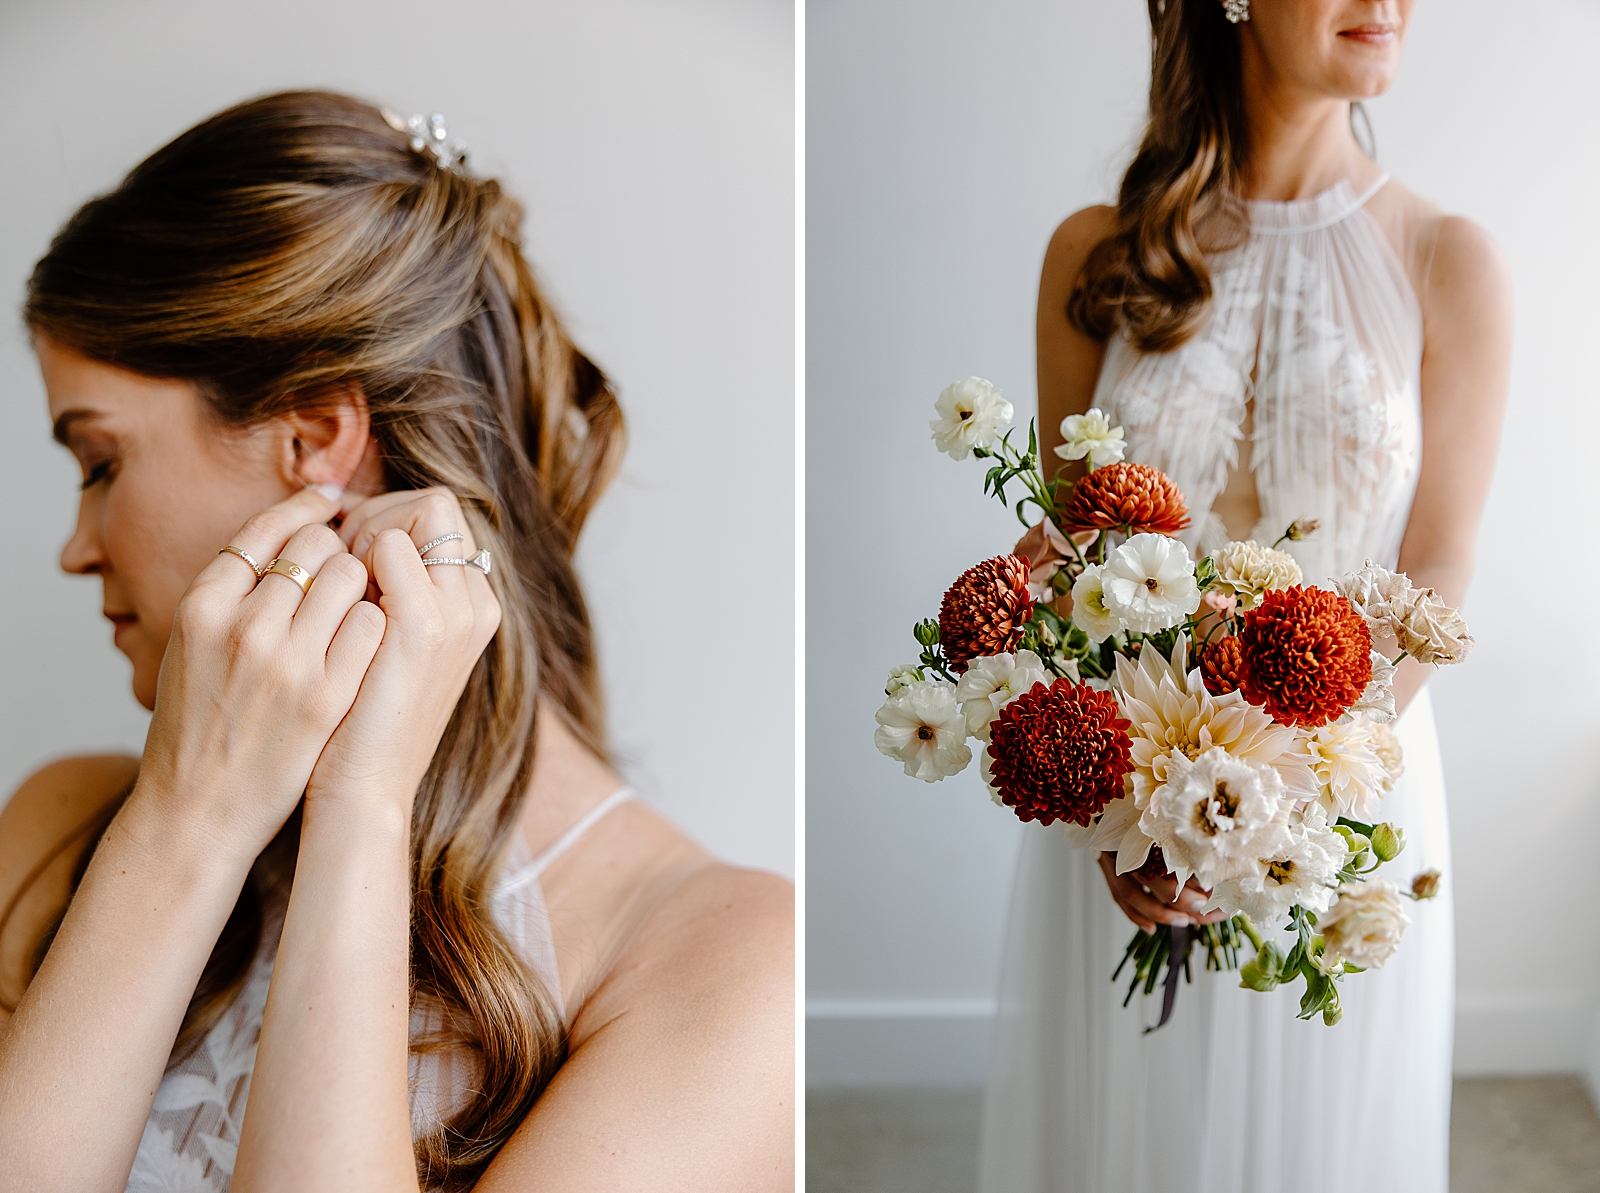 Closeup of Bride putting on earrings and holding floral bouquet